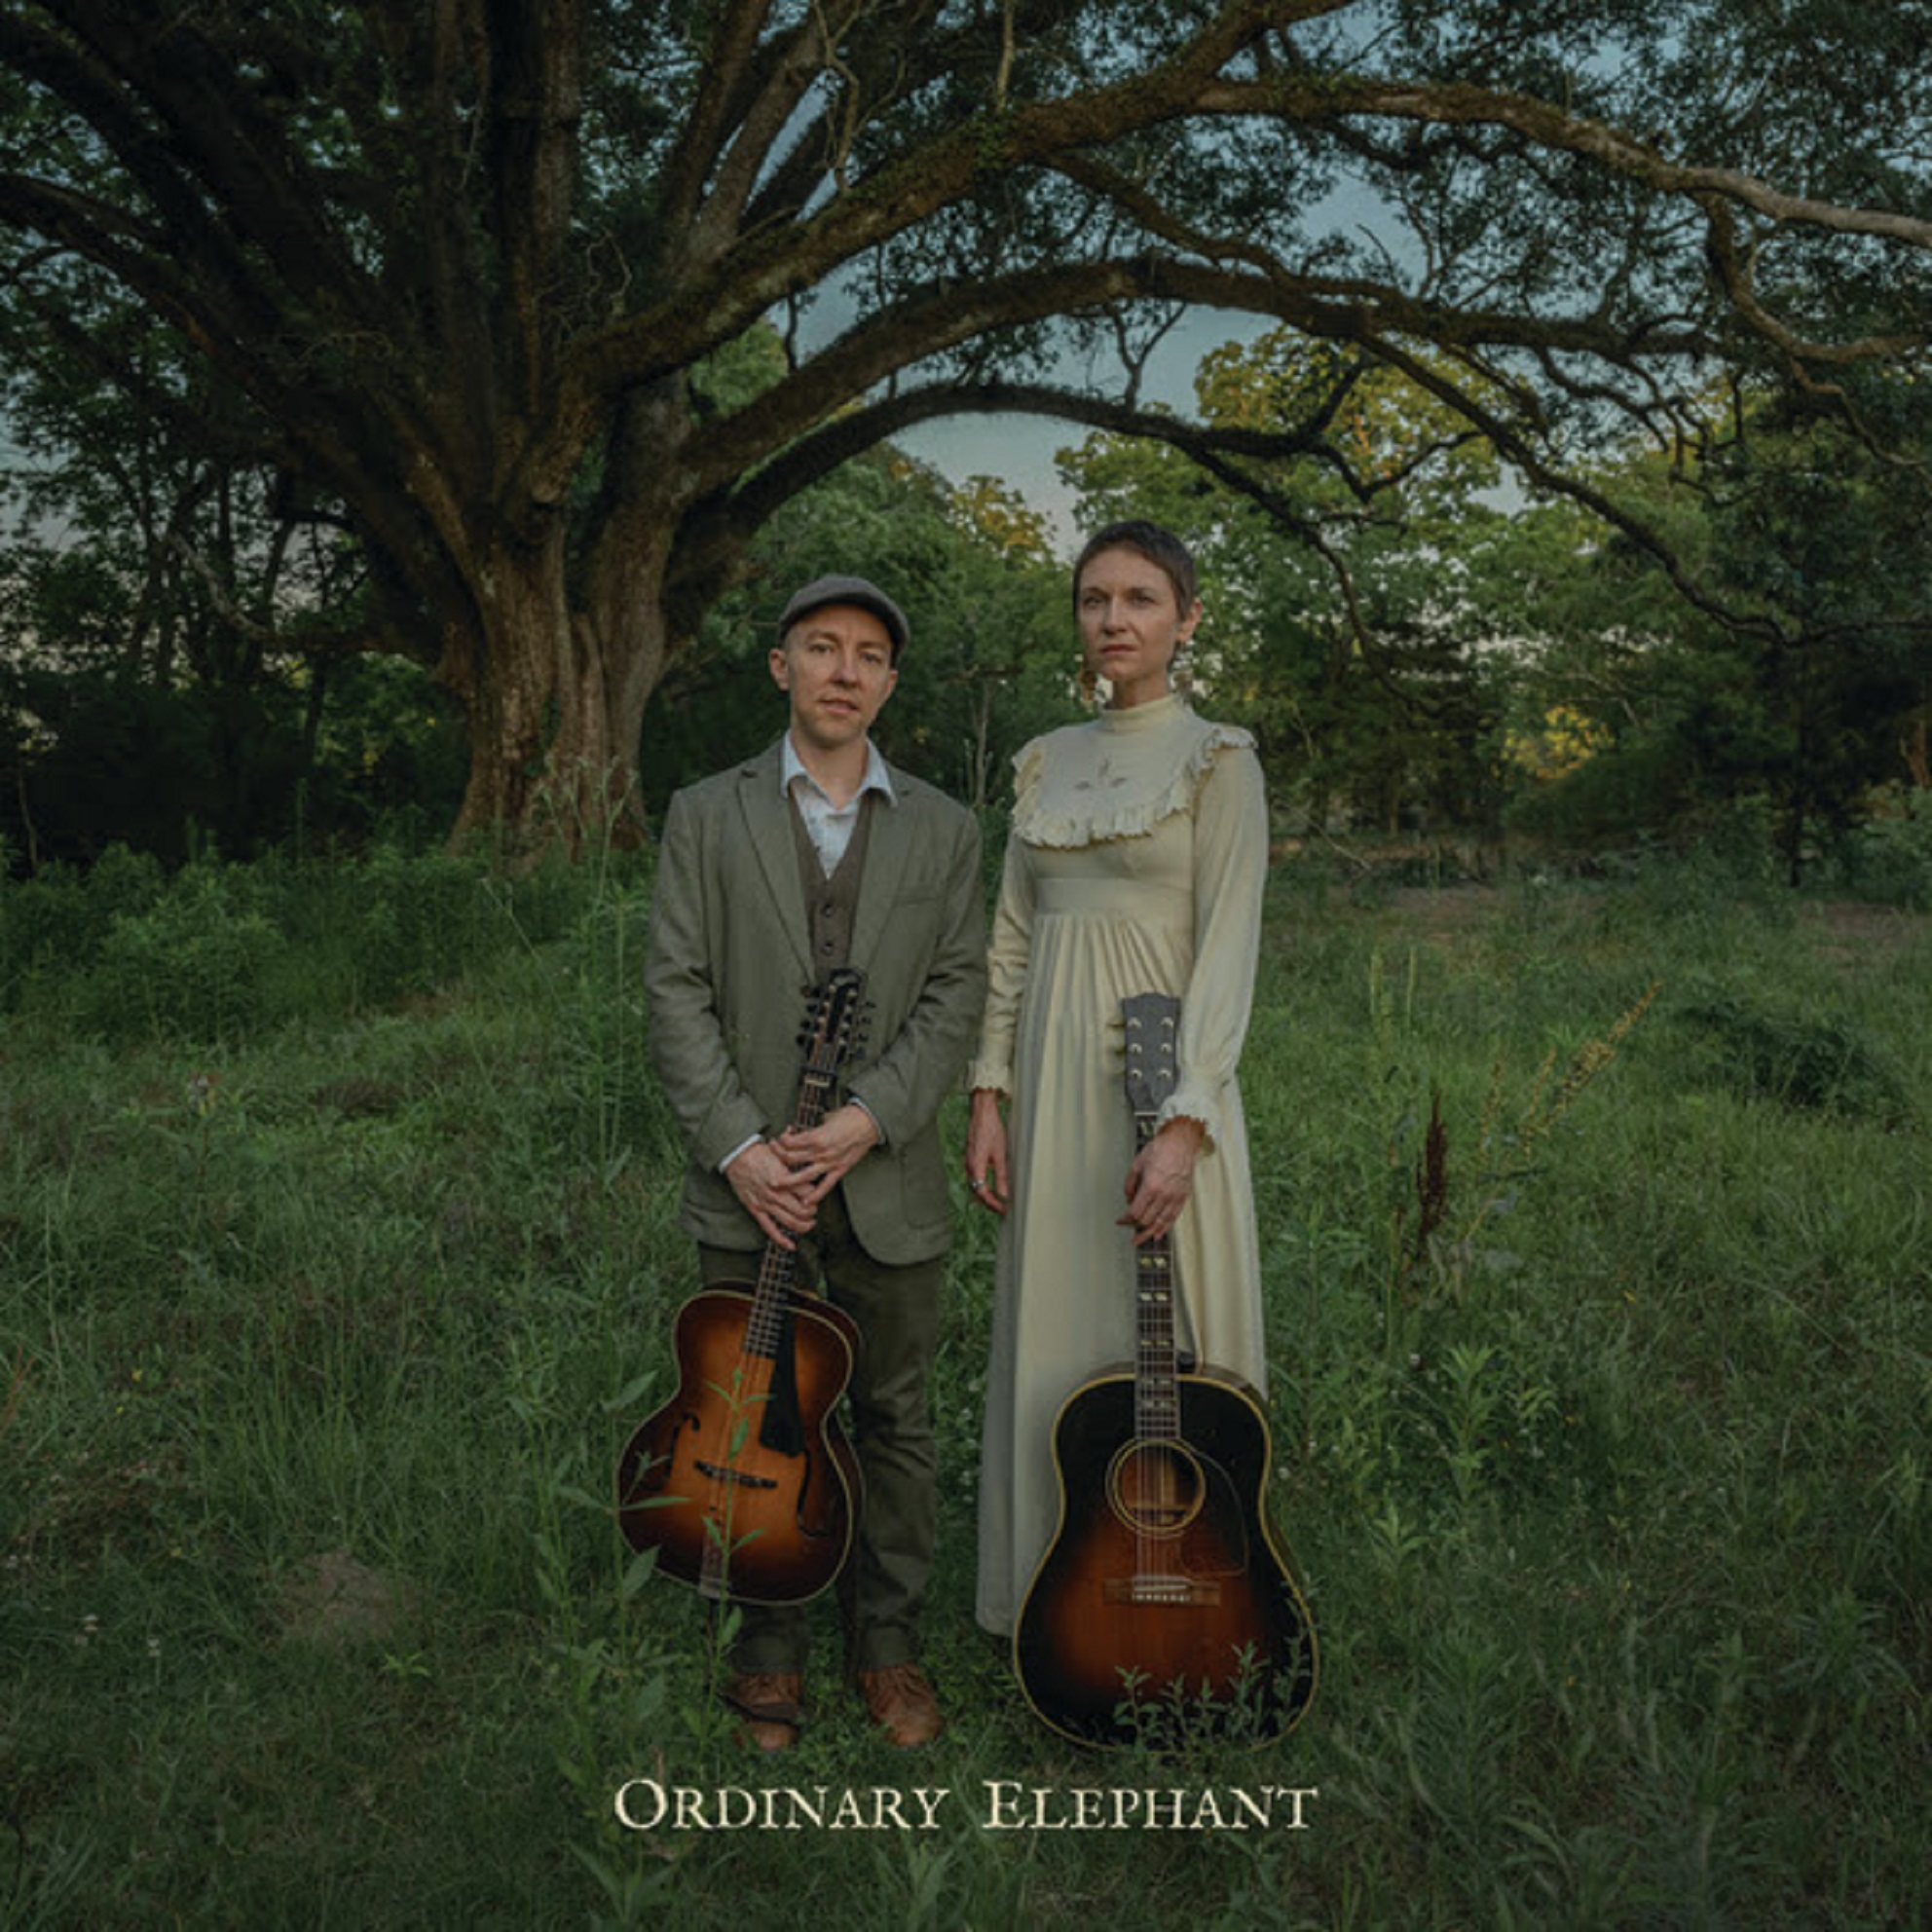 Mesmerizing Singer/Songwriter Duo ORDINARY ELEPHANT Deftly Spins Stories Into Songs on Captivating Self-Titled Album Produced by Dirk Powell, Out May 3